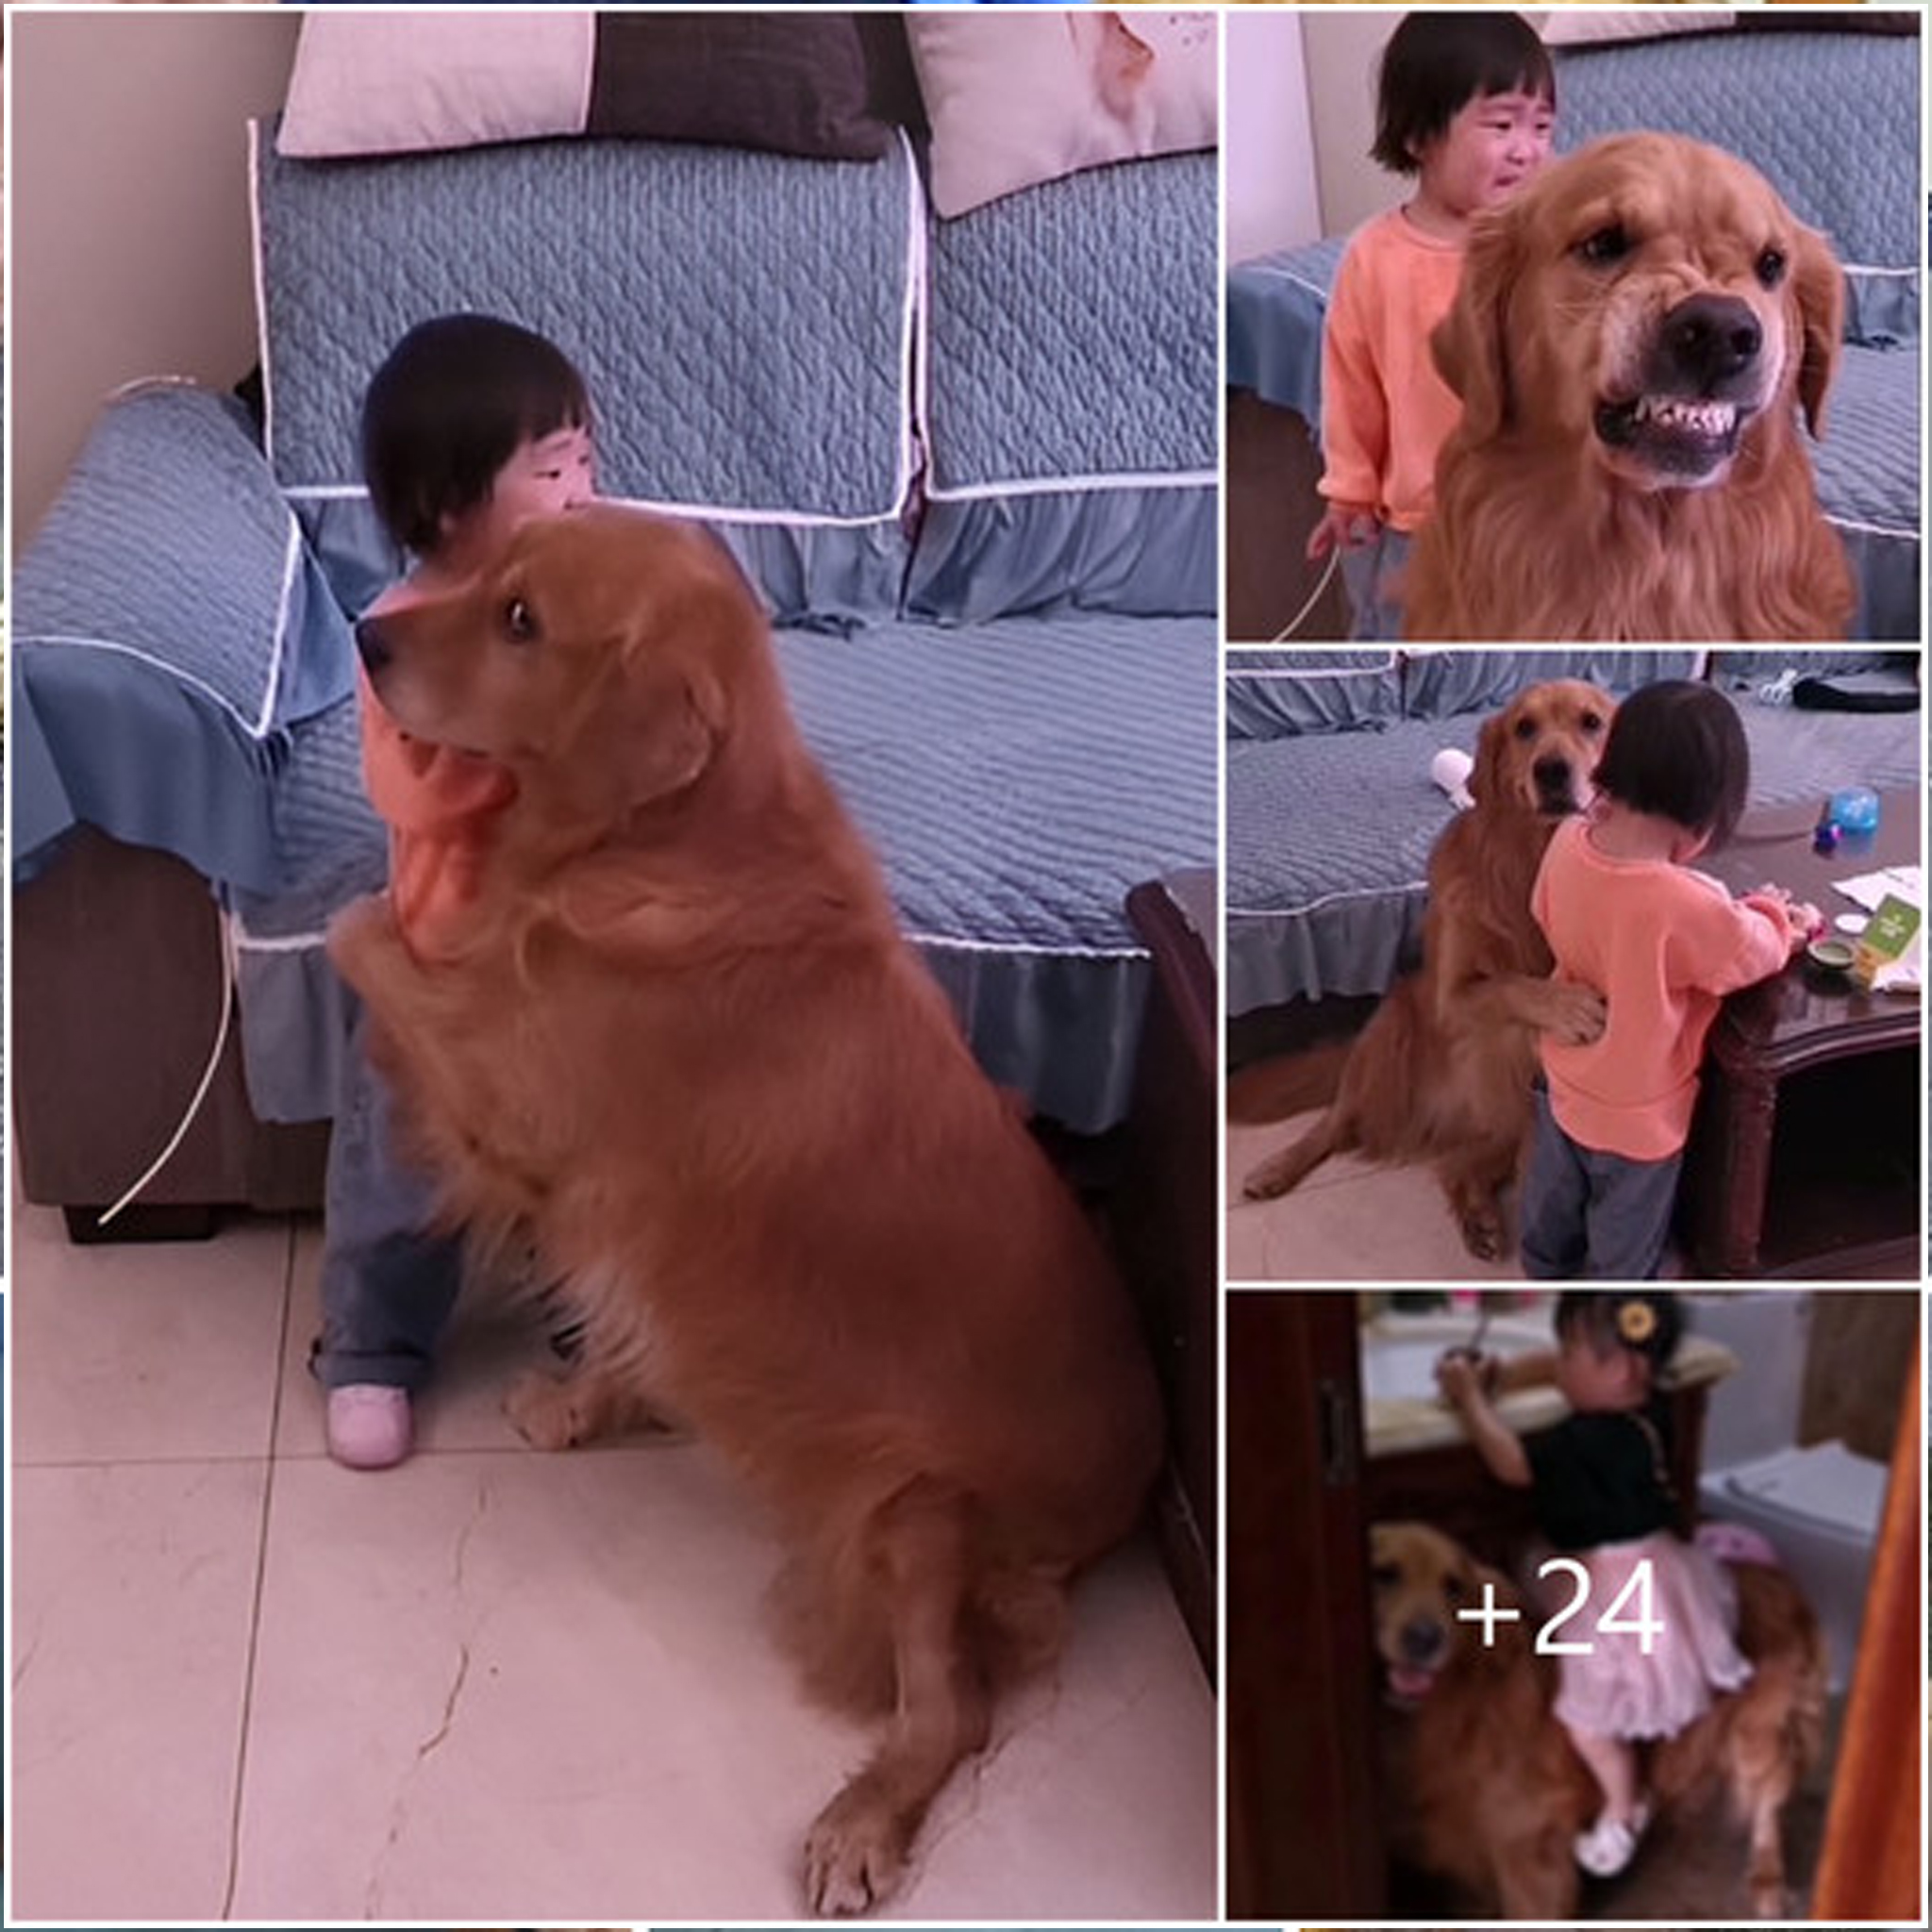 Millions of people were brought to tears when a brave Golden Retriever dog saved a crying baby from an unjust punishment from his mother. The touching and humorous scene captured the hearts of many.